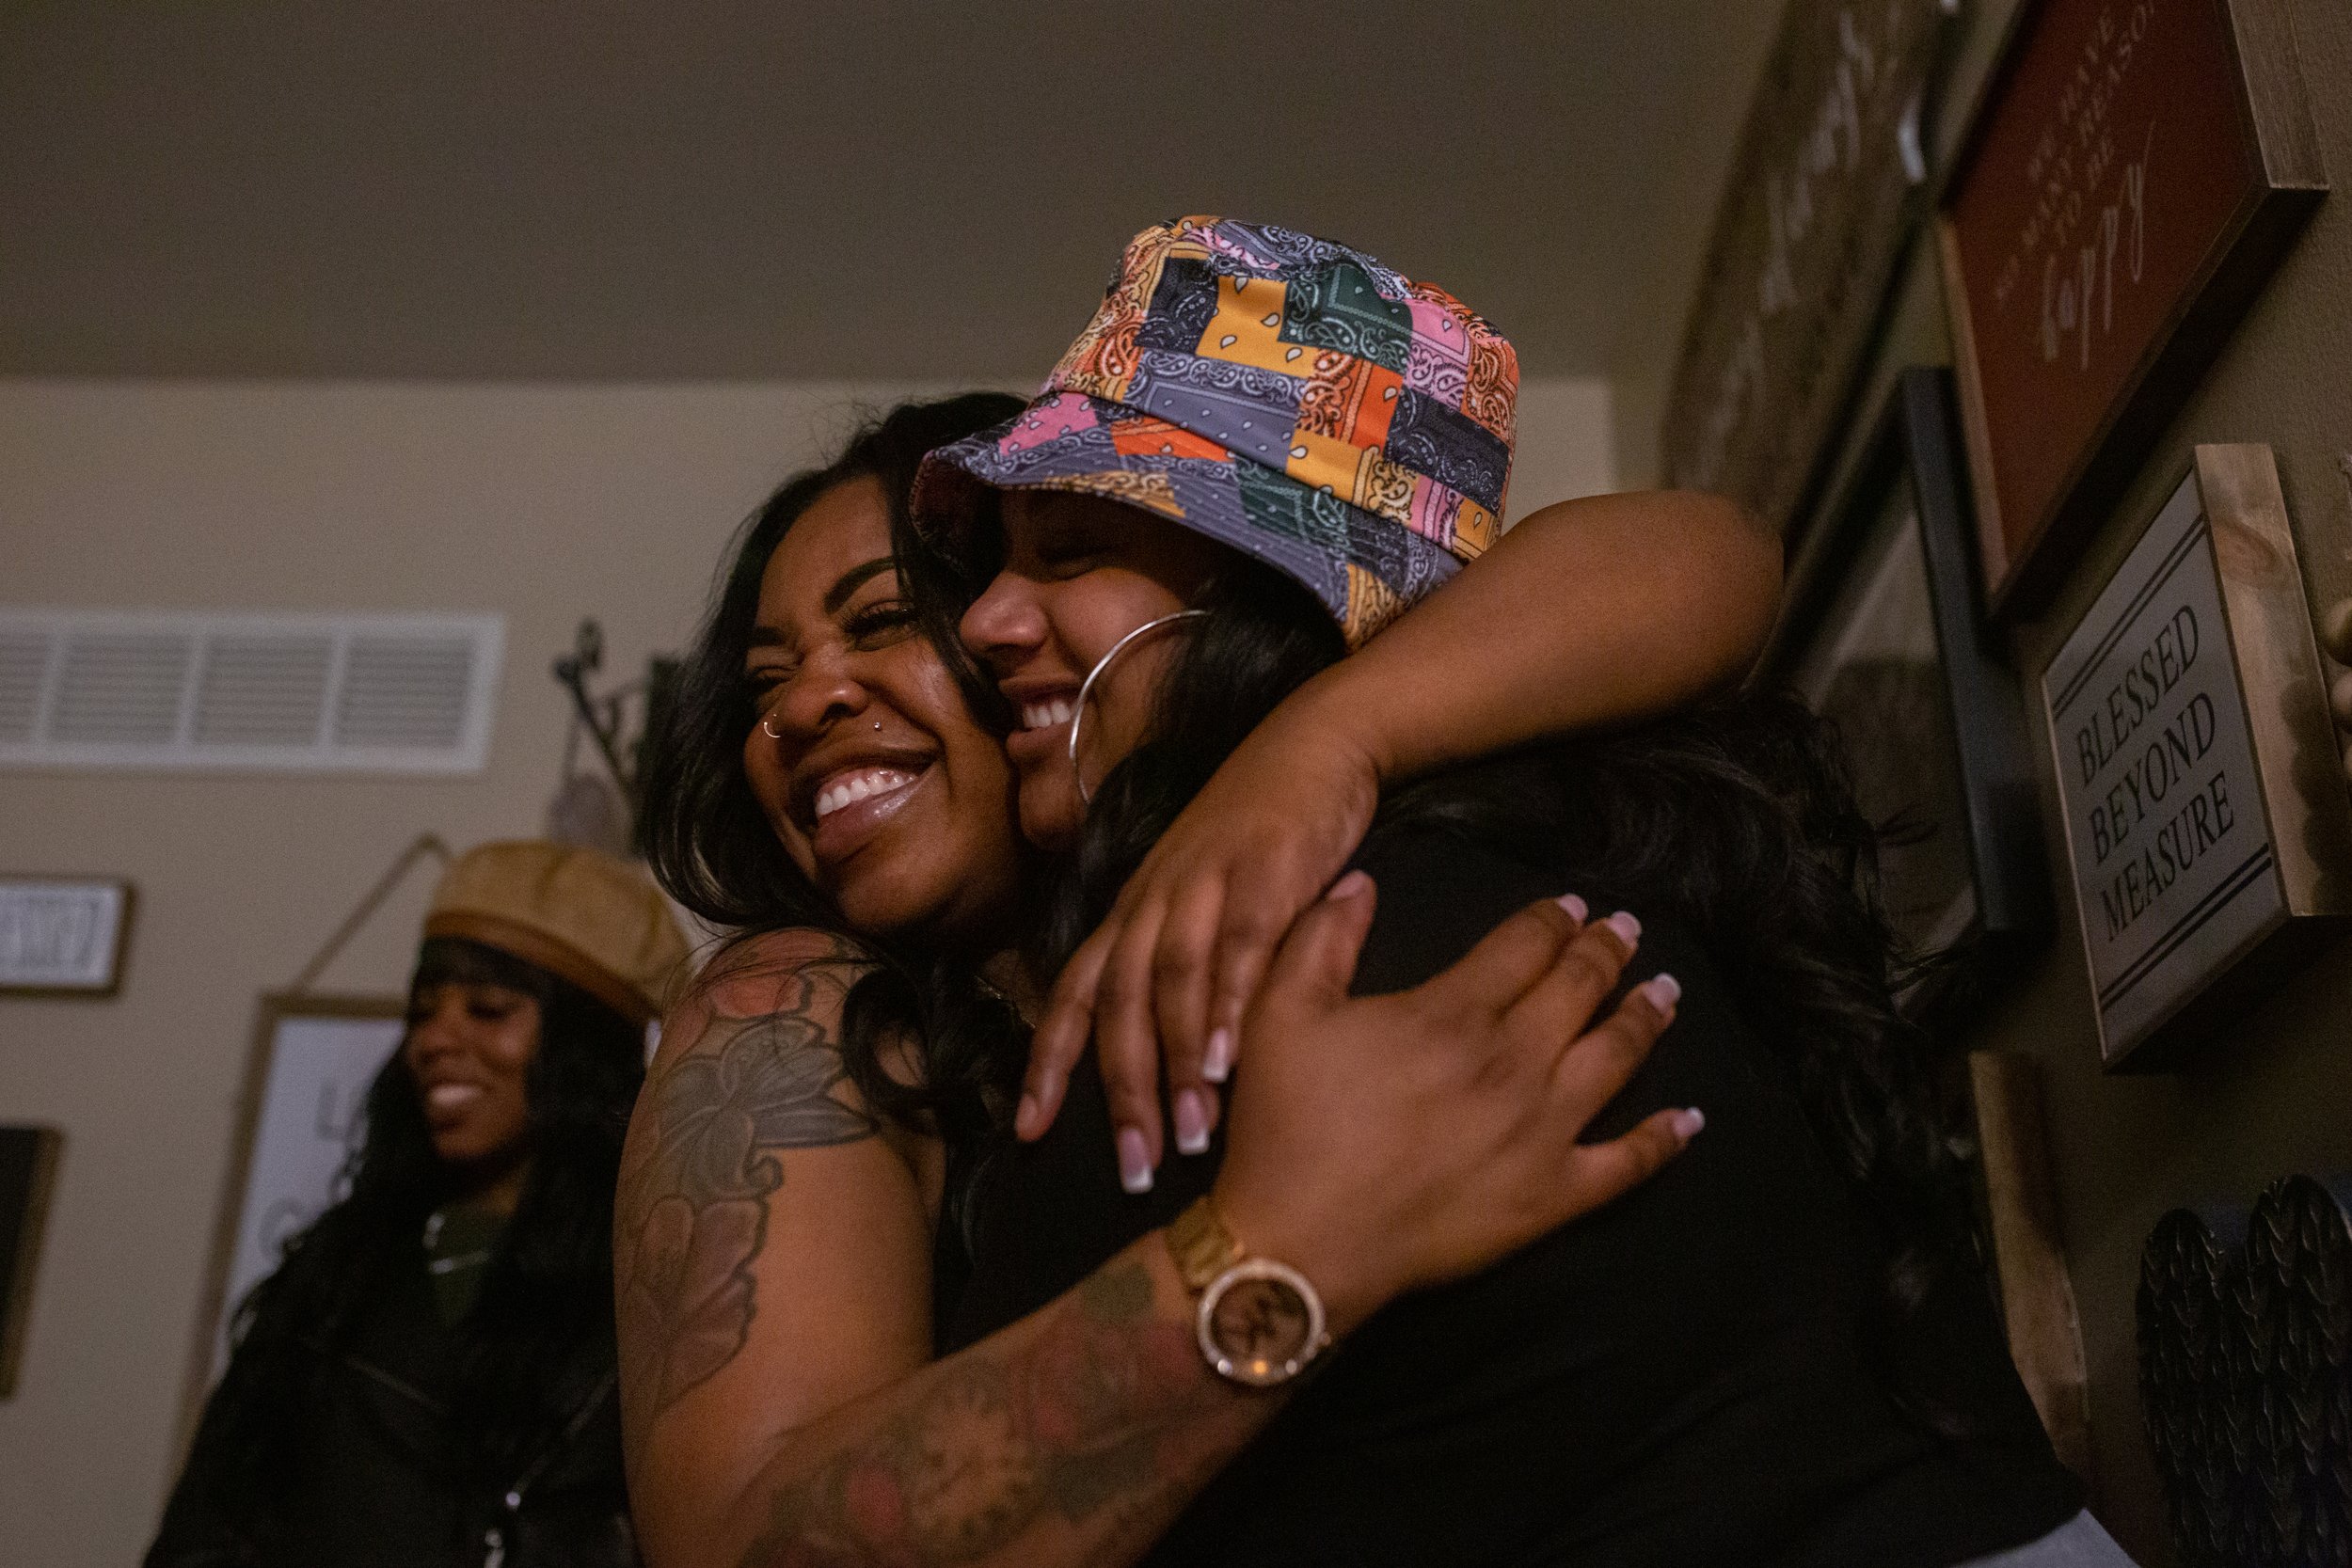  LaChay hugs her friend Brianna Ballard at a friend’s home in St. Louis the night of her brother’s funeral, March 30, 2021. Hometown friends and family came together with those traveling from Texas to support and bring some moments of joy to the fami